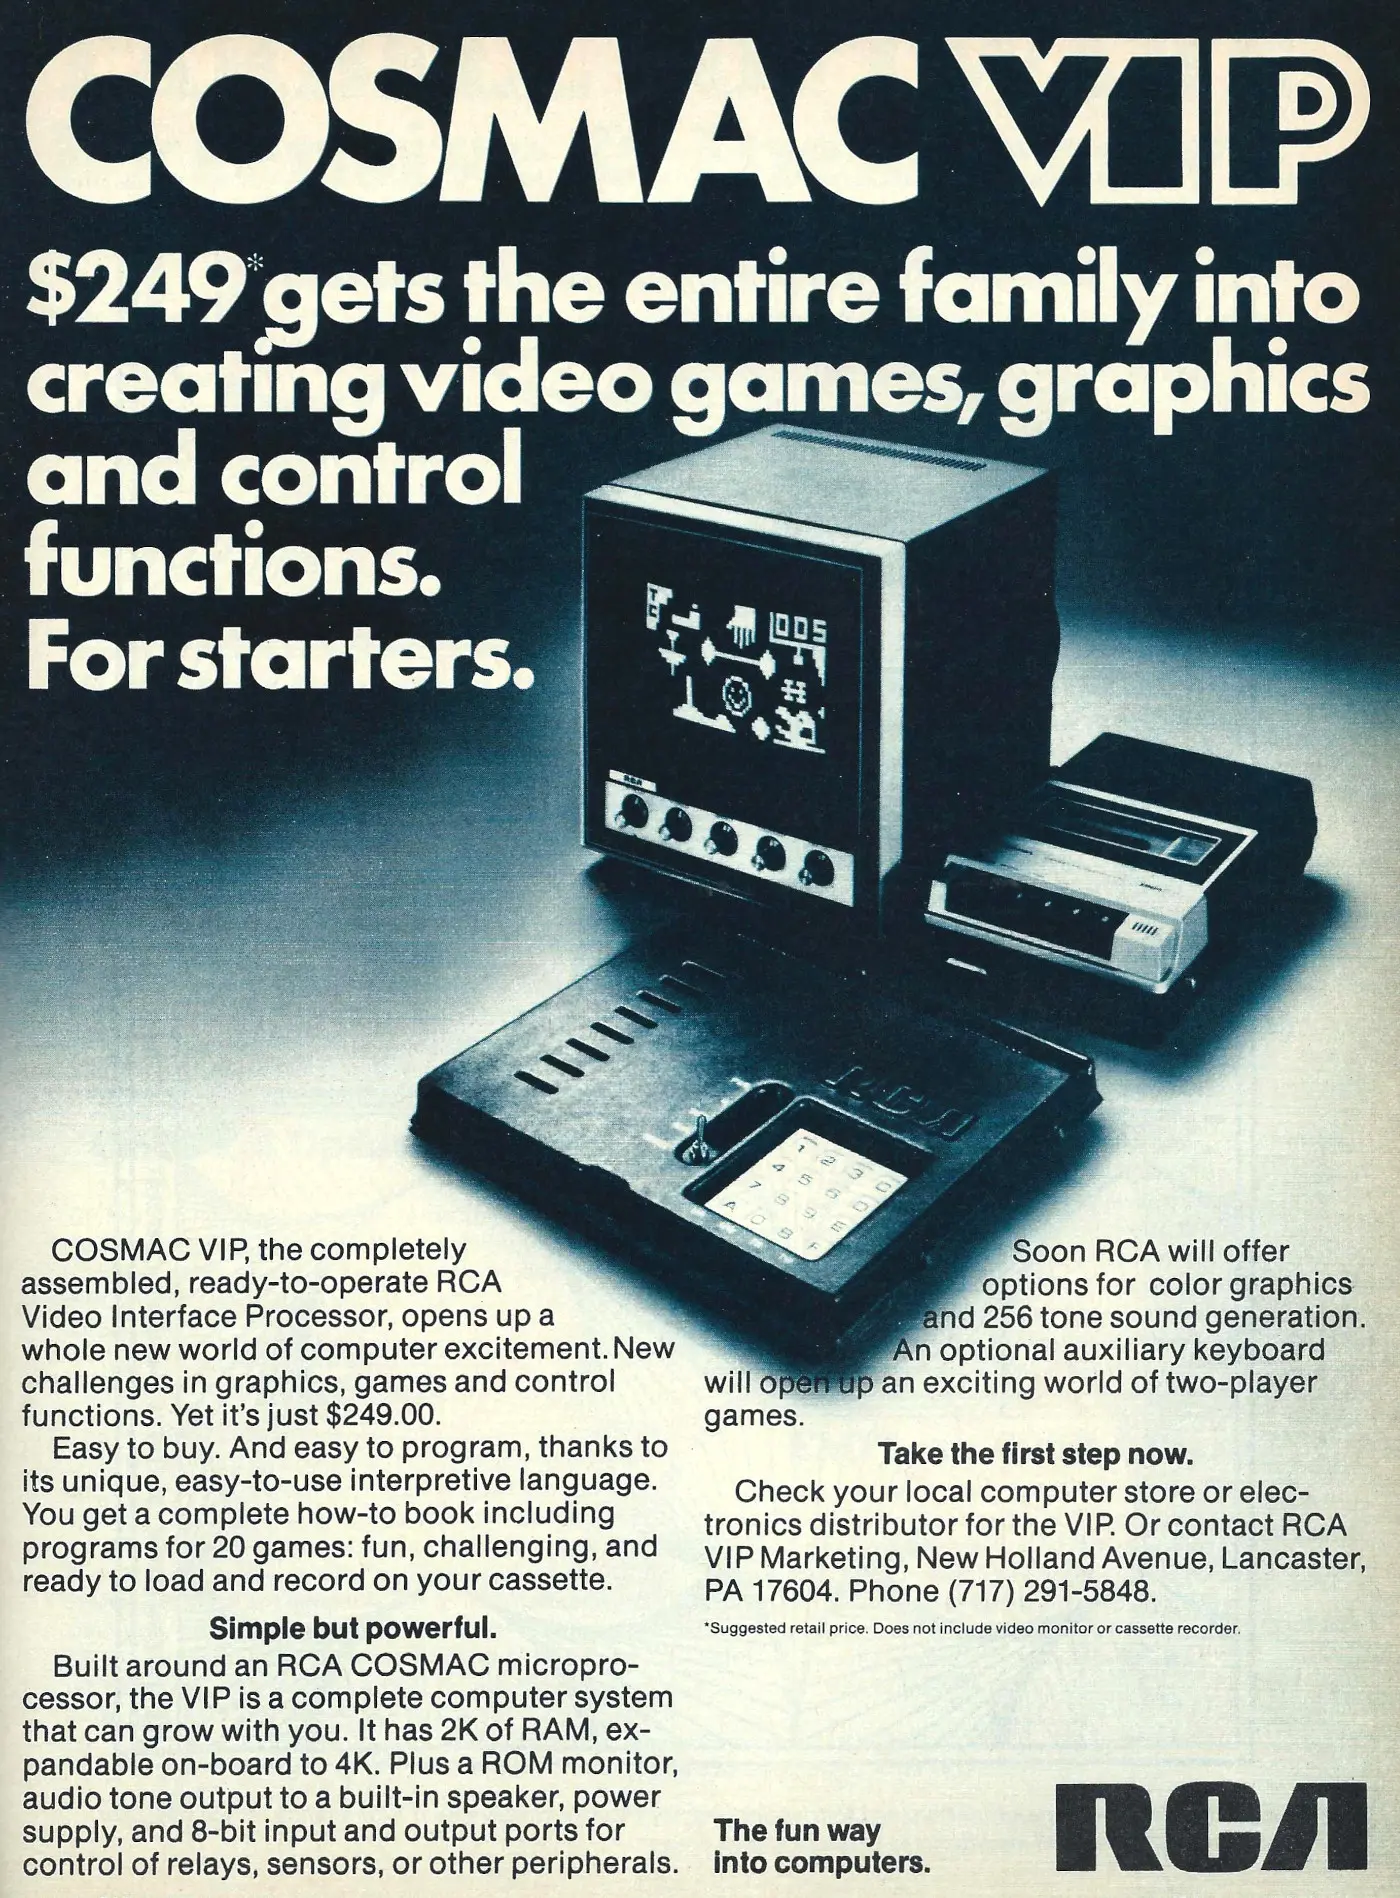 RCA Advert: COSMAC VIP: $249 gets the entire family into creating video games, from Byte - The Small Systems Journal, September 1978